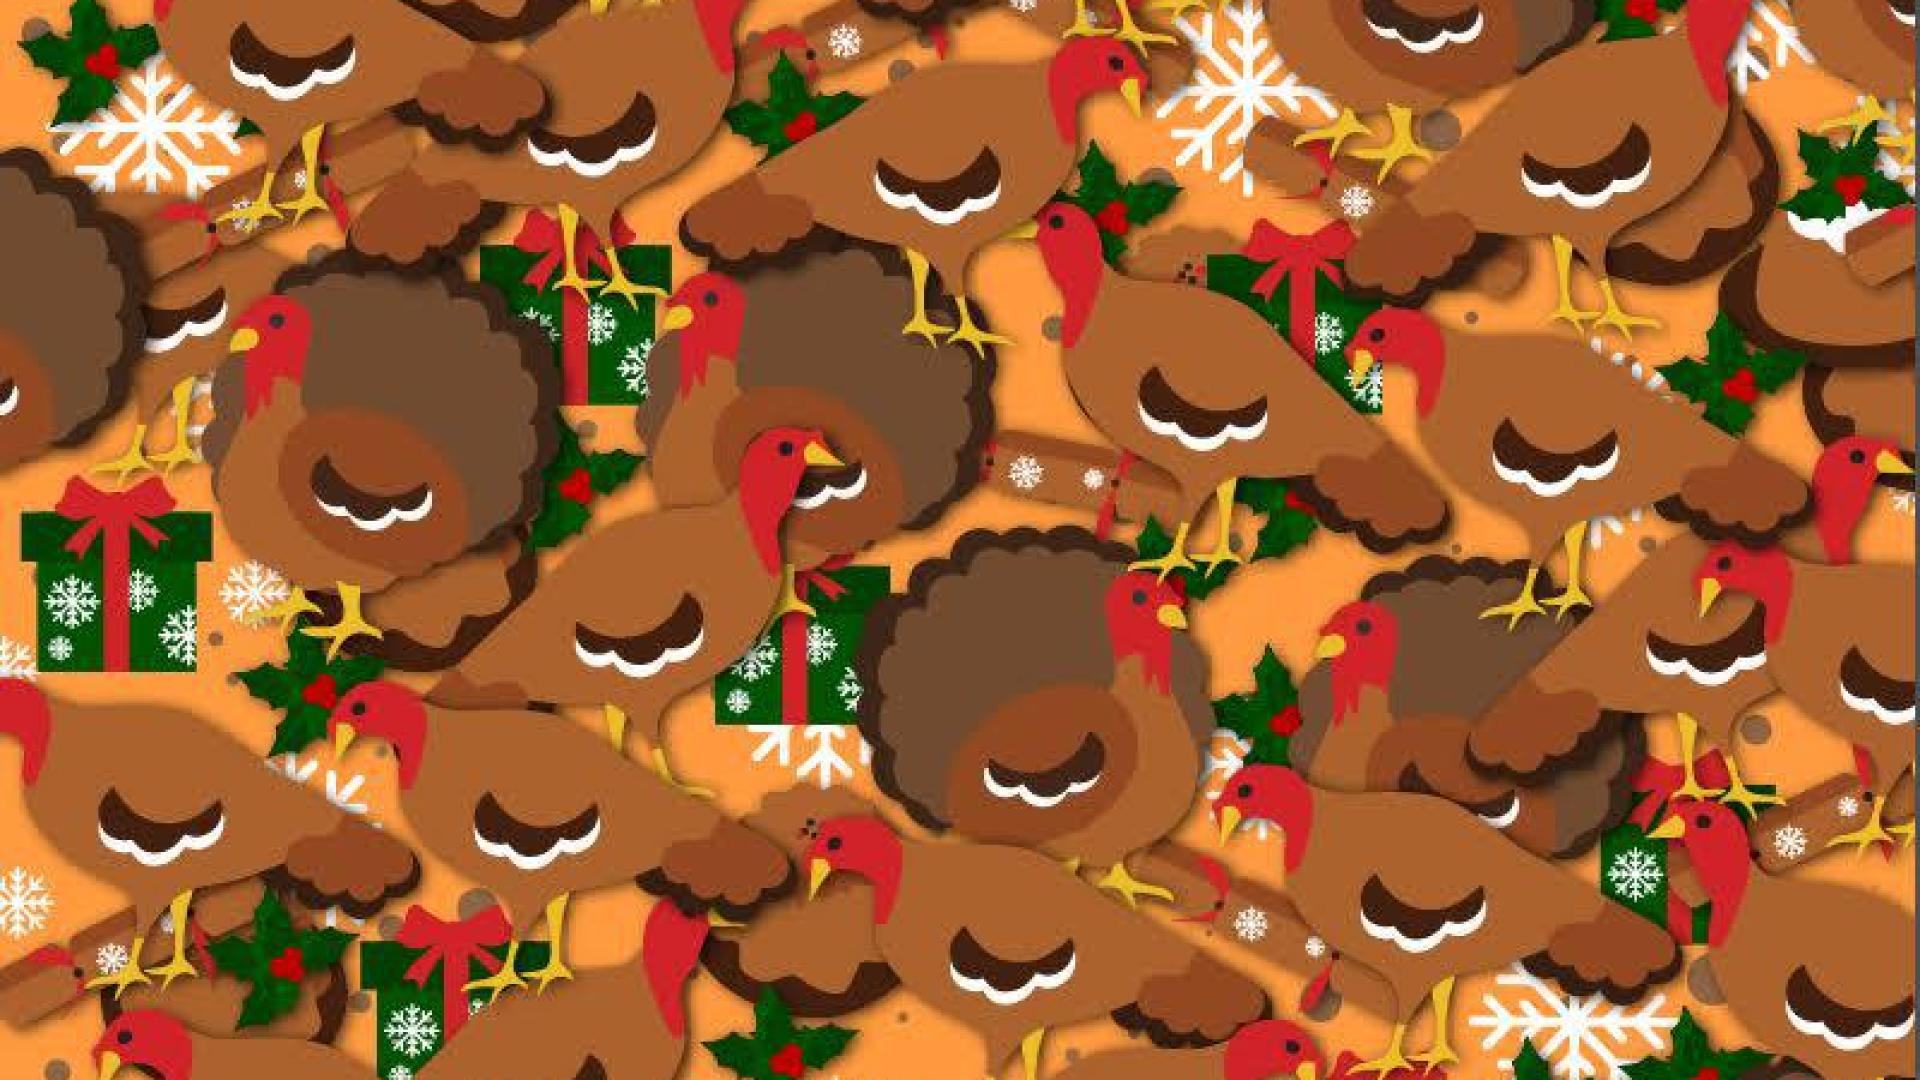 Can you spot the Christmas pudding among the turkeys in this festive brainteaser?